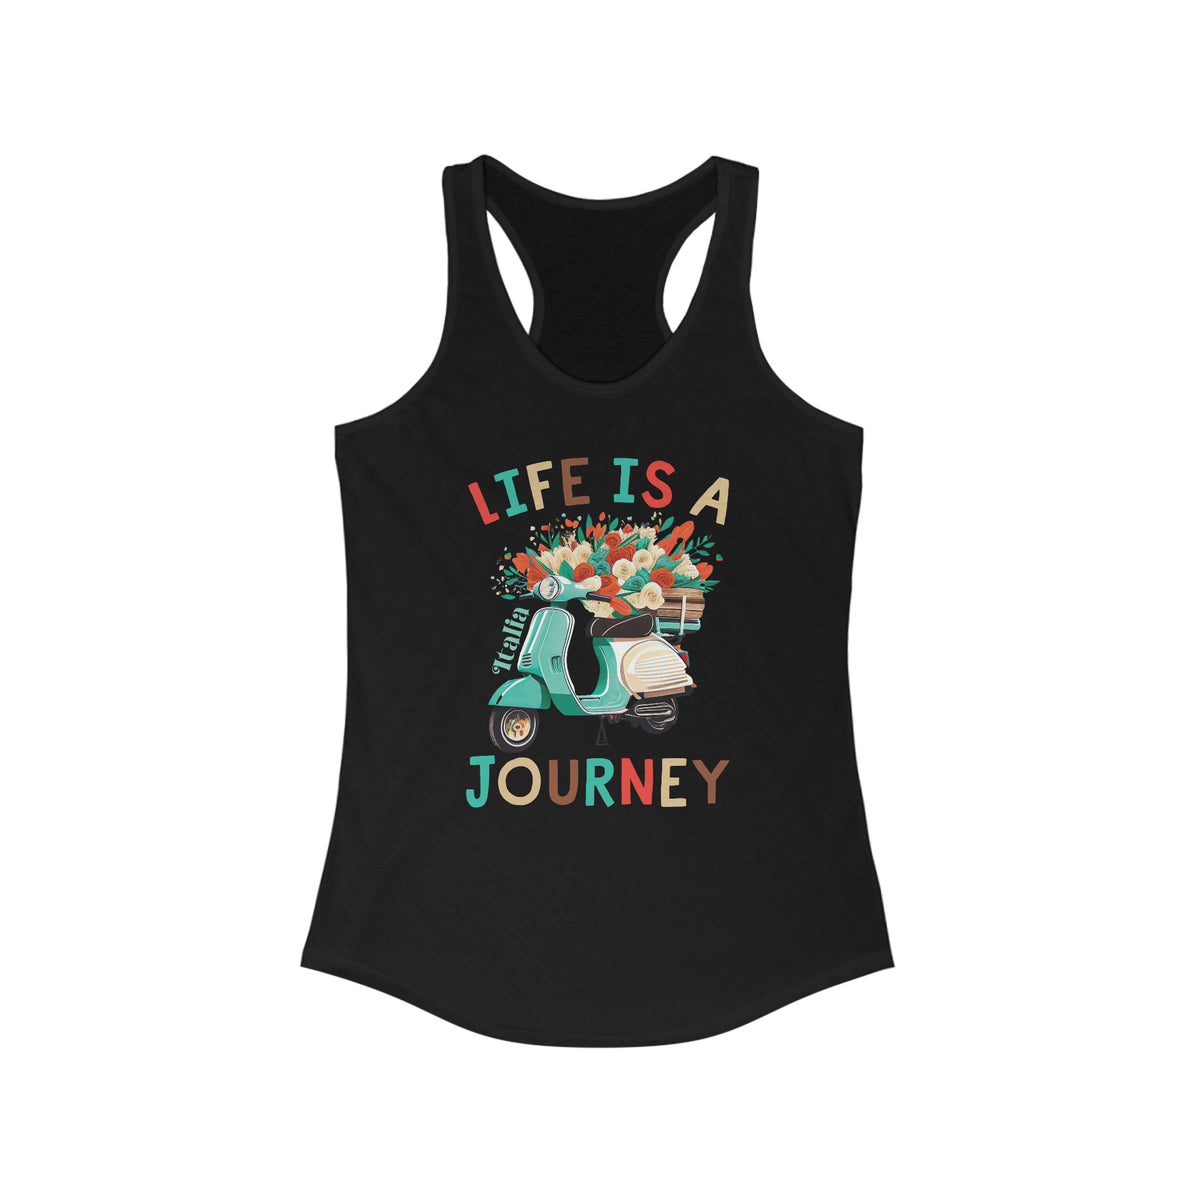 Life Is A Journey Italy Shirt | Italy Travel Gifts | Italy Vacation Shirt | Gift For Her | Women's Slim-fit Racerback Tank Top